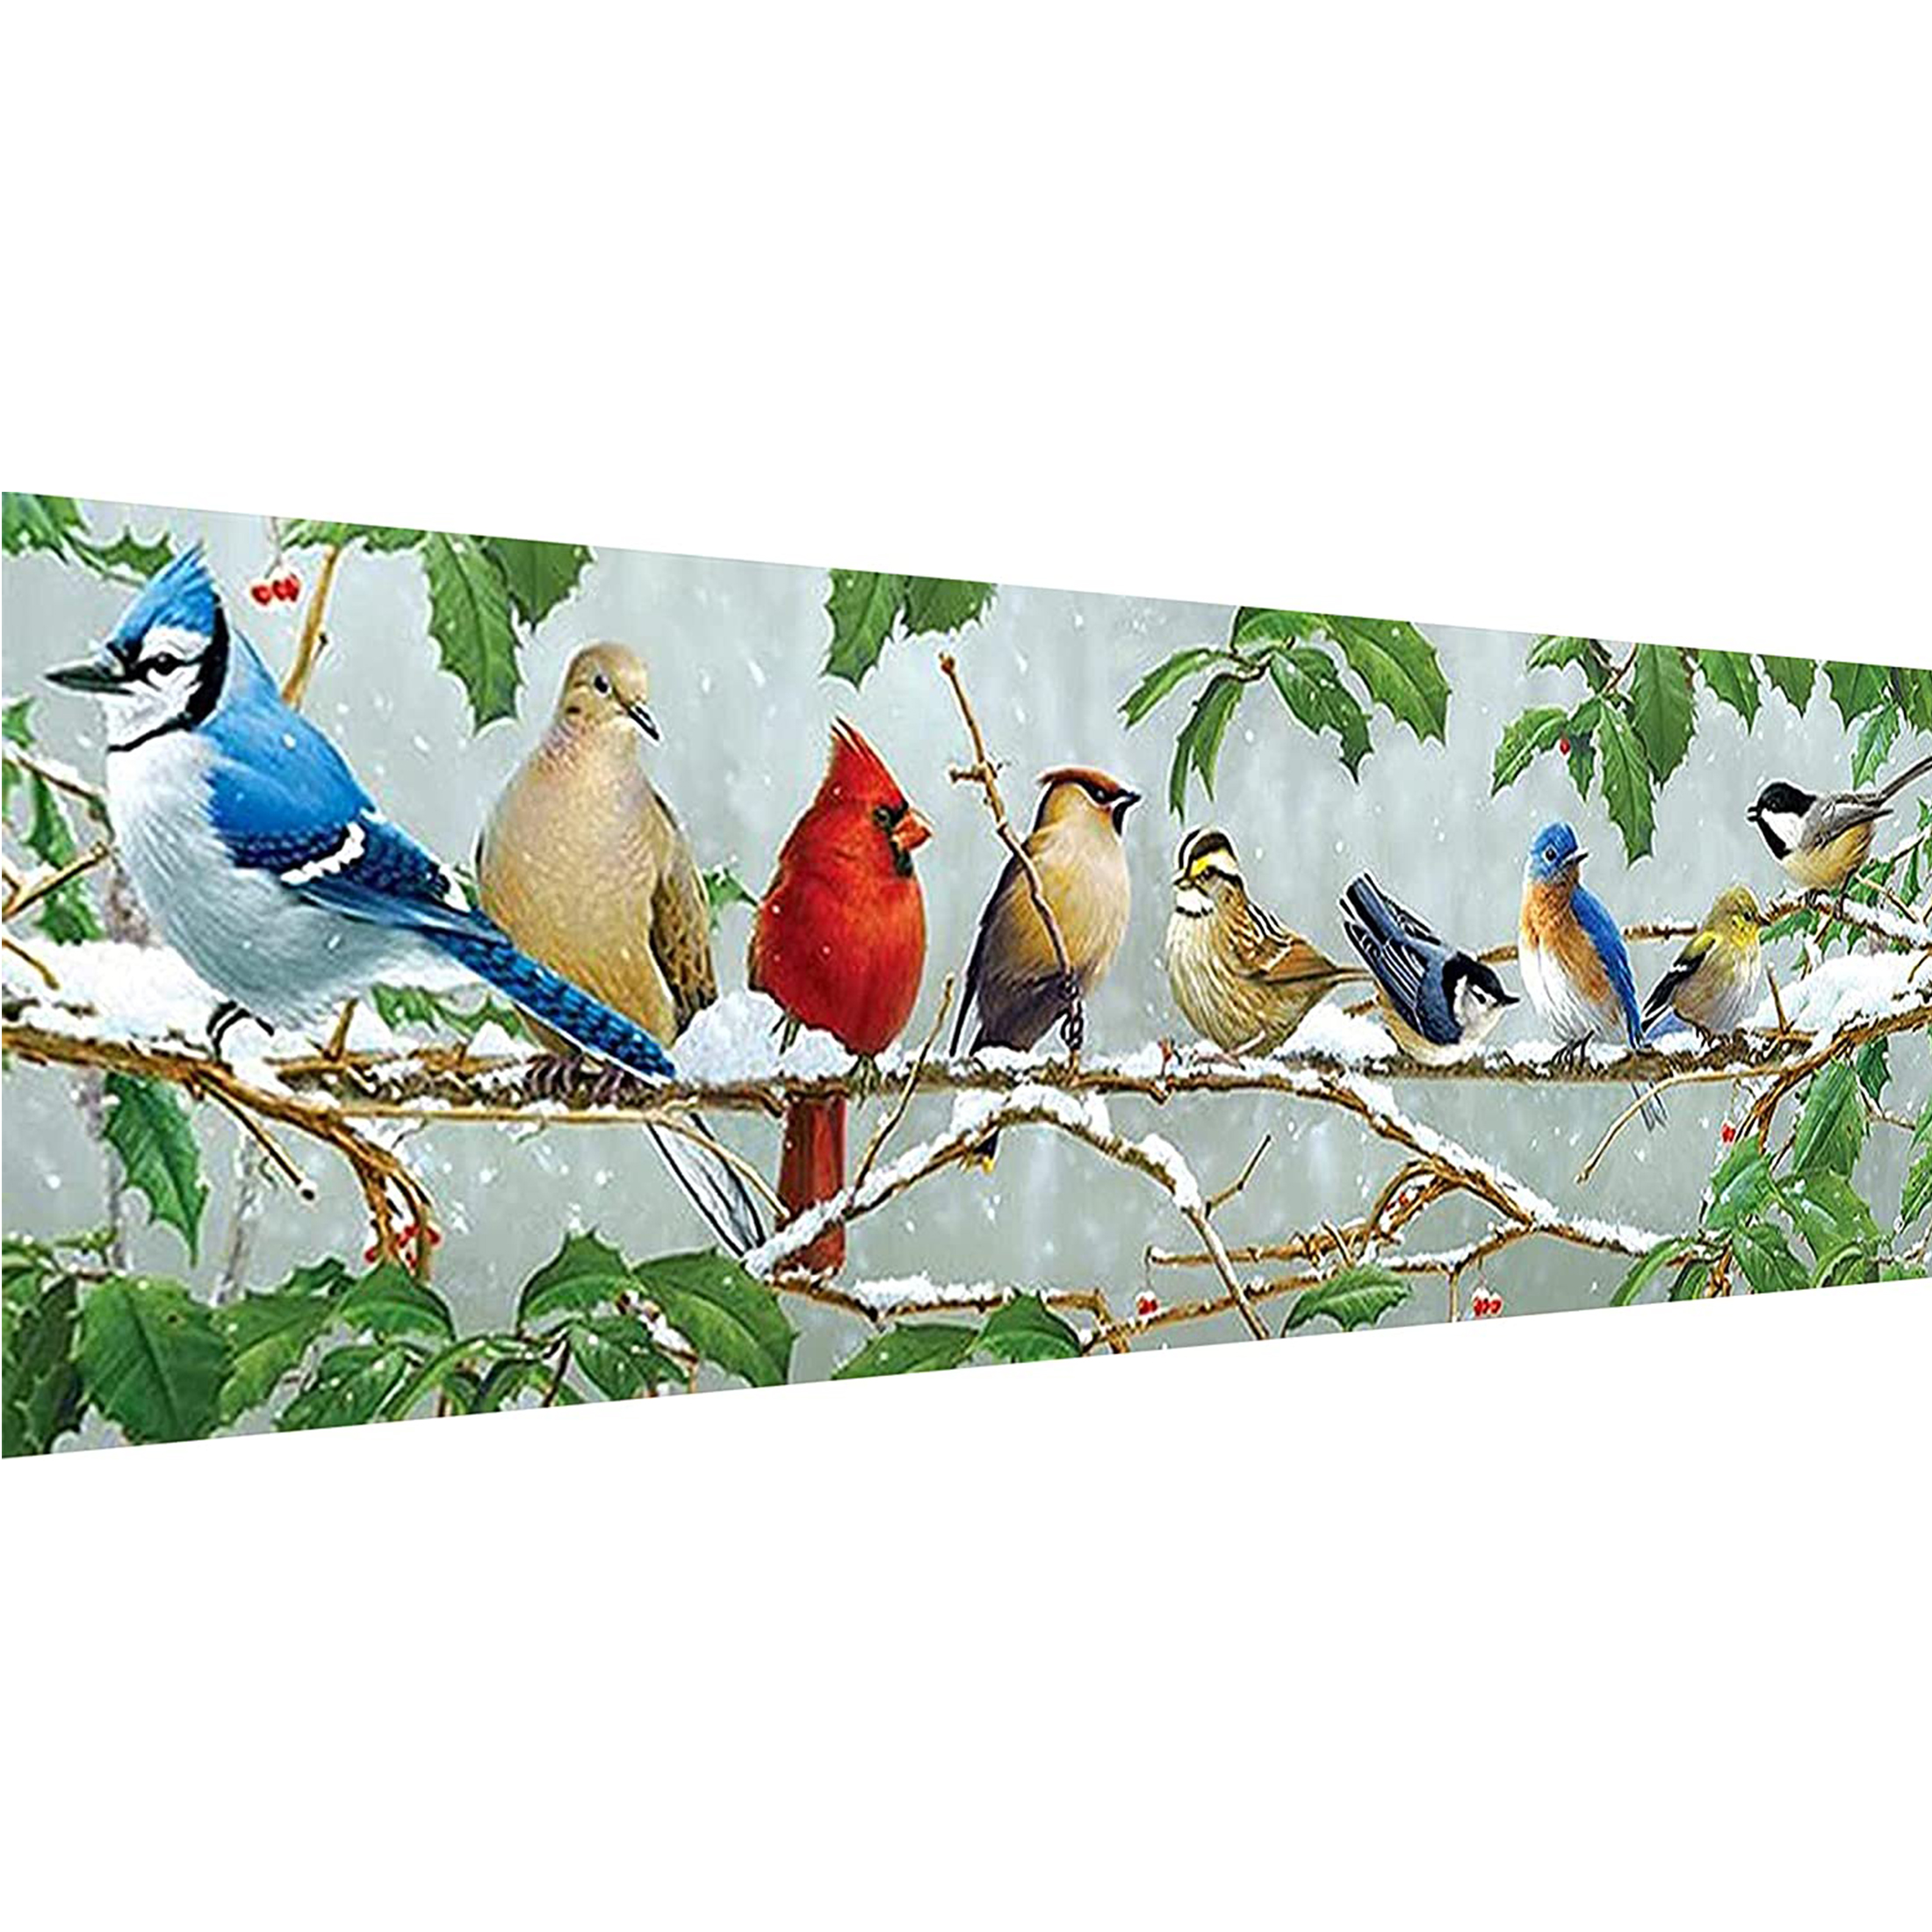 YALKIN 5D Diamond Painting Kits for Adults DIY Large Winter Birds Full  Round Drill (35.4x11.8inch) for Home Wall Decor 